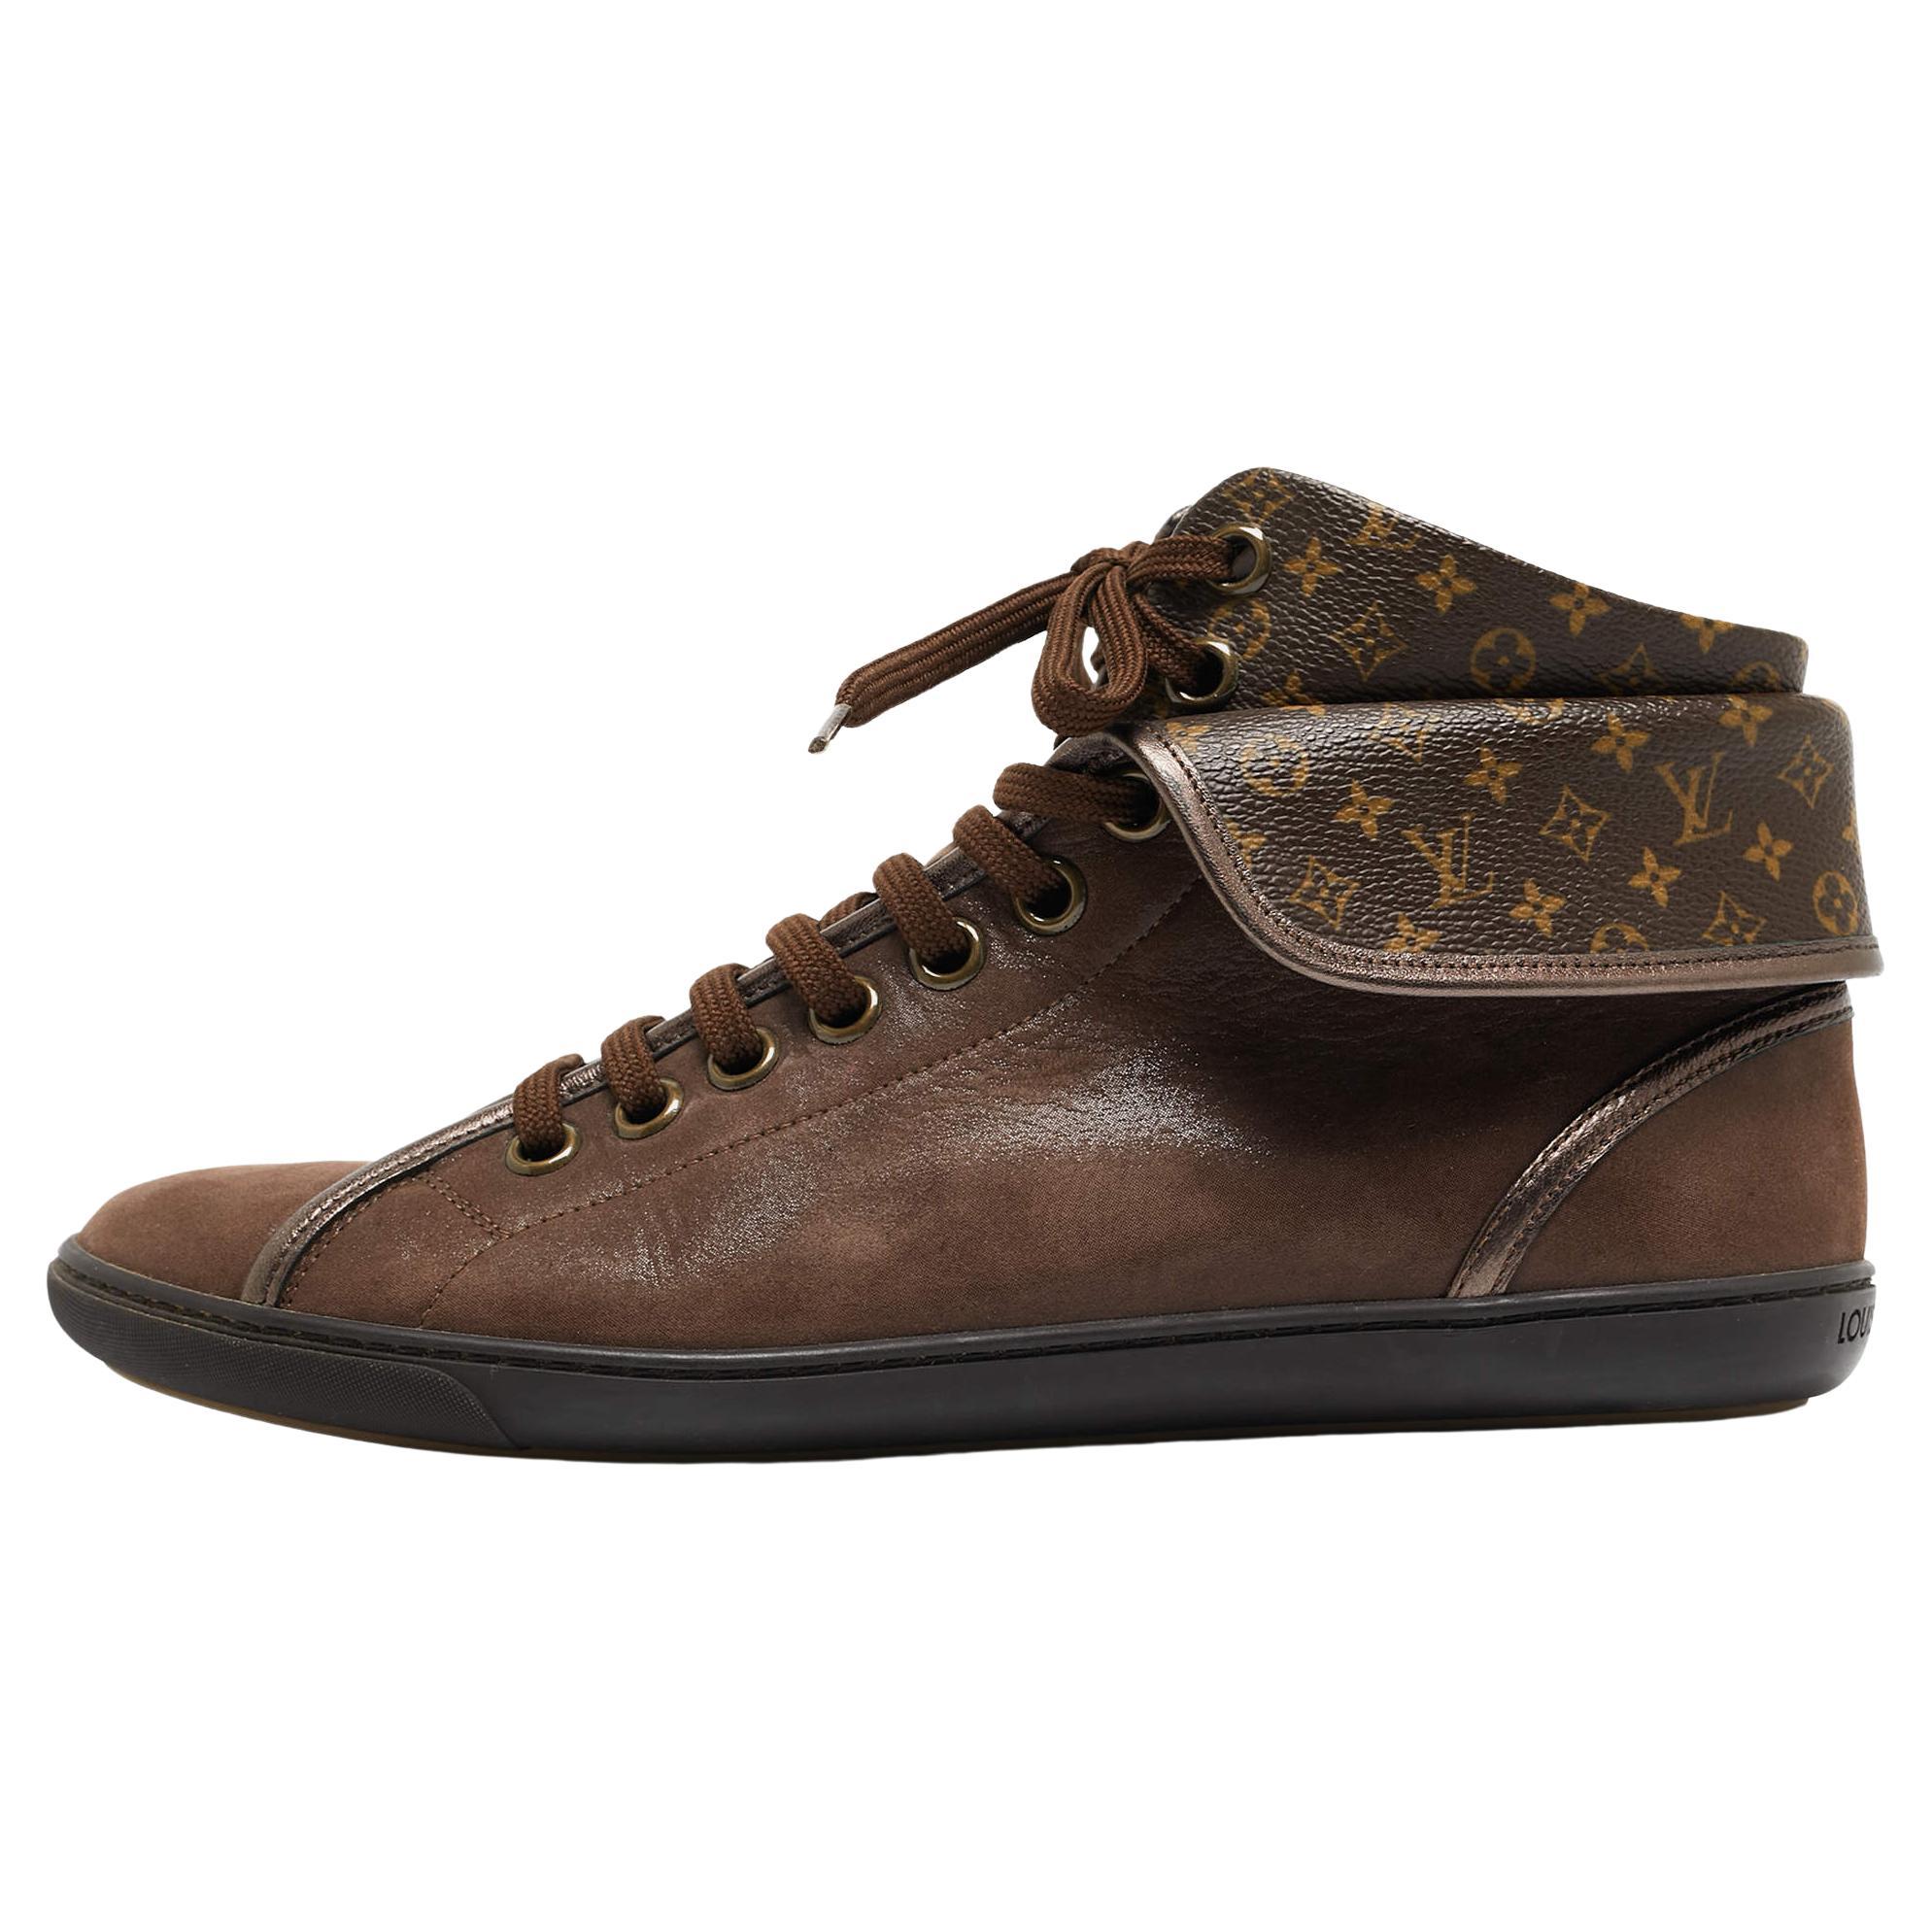 Louis Vuitton Brown Monogram Canvas and Leather Brea Sneakers Size 38.5 For Sale